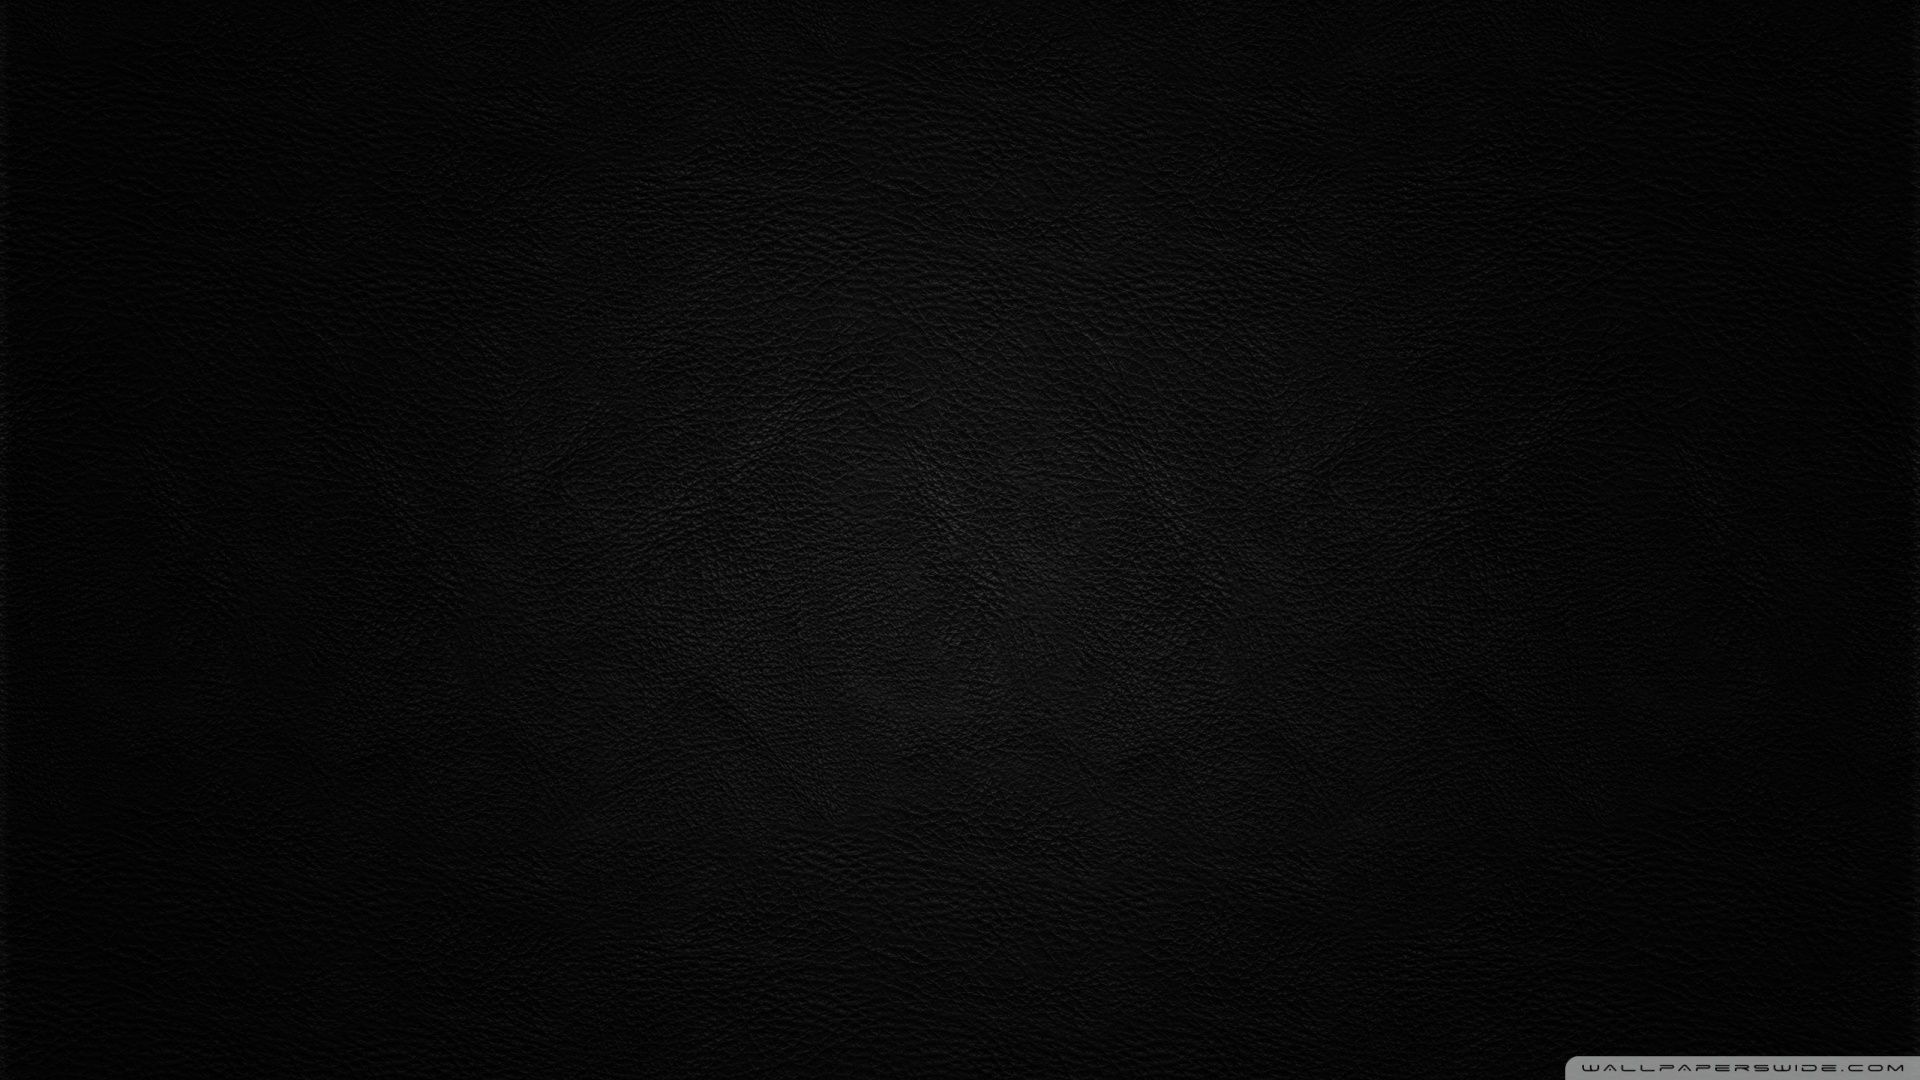 Gallery for - black background wallpaper